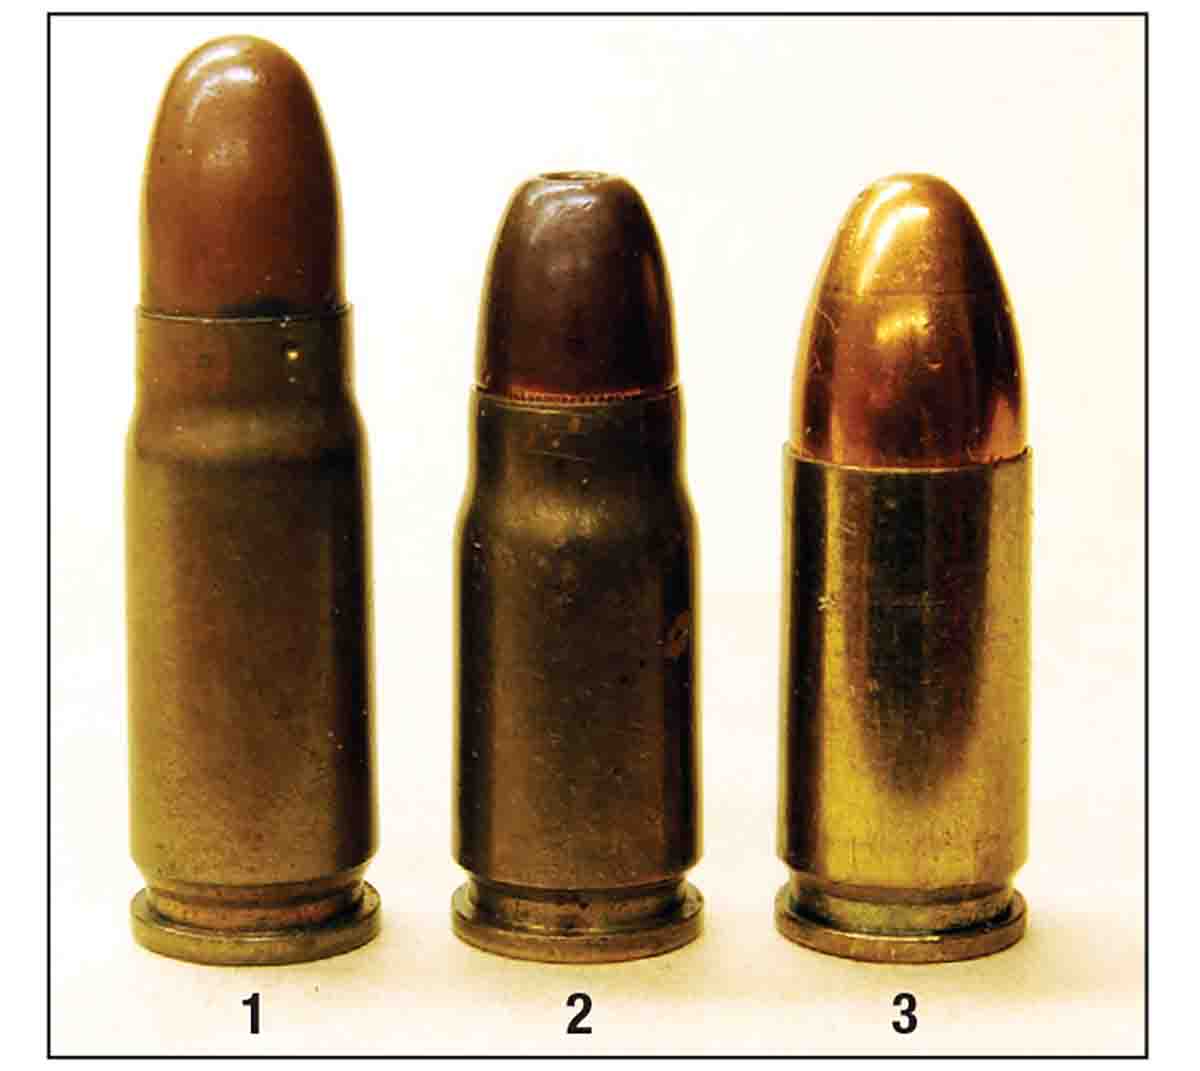 The 7.65mm Borchardt (1) was shortened to 7.65mm Parabellum or 30 Luger (2) to fit the new Luger magazine and grip frame. A 9x19mm Luger  (3) is shown for comparison.